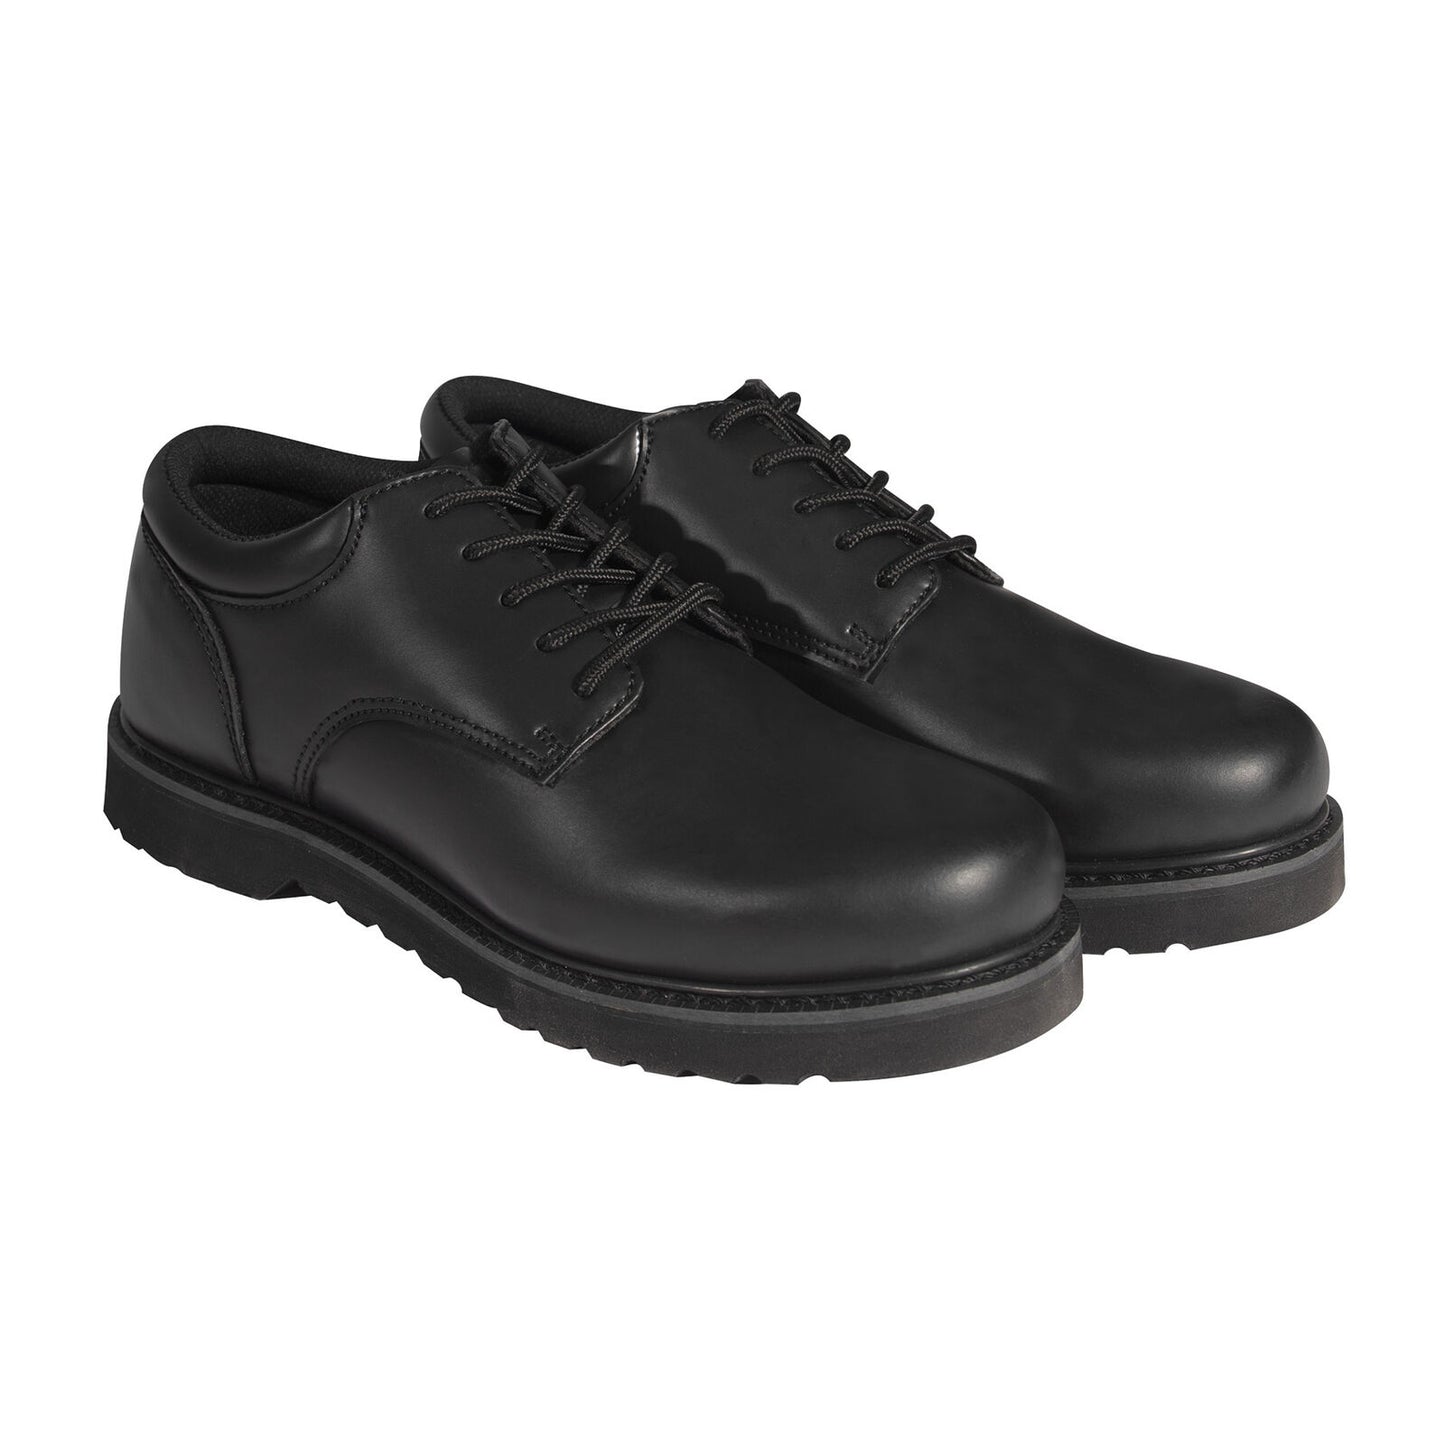 Rothco Black Uniform Oxfords With Work Soles & Padded Collar